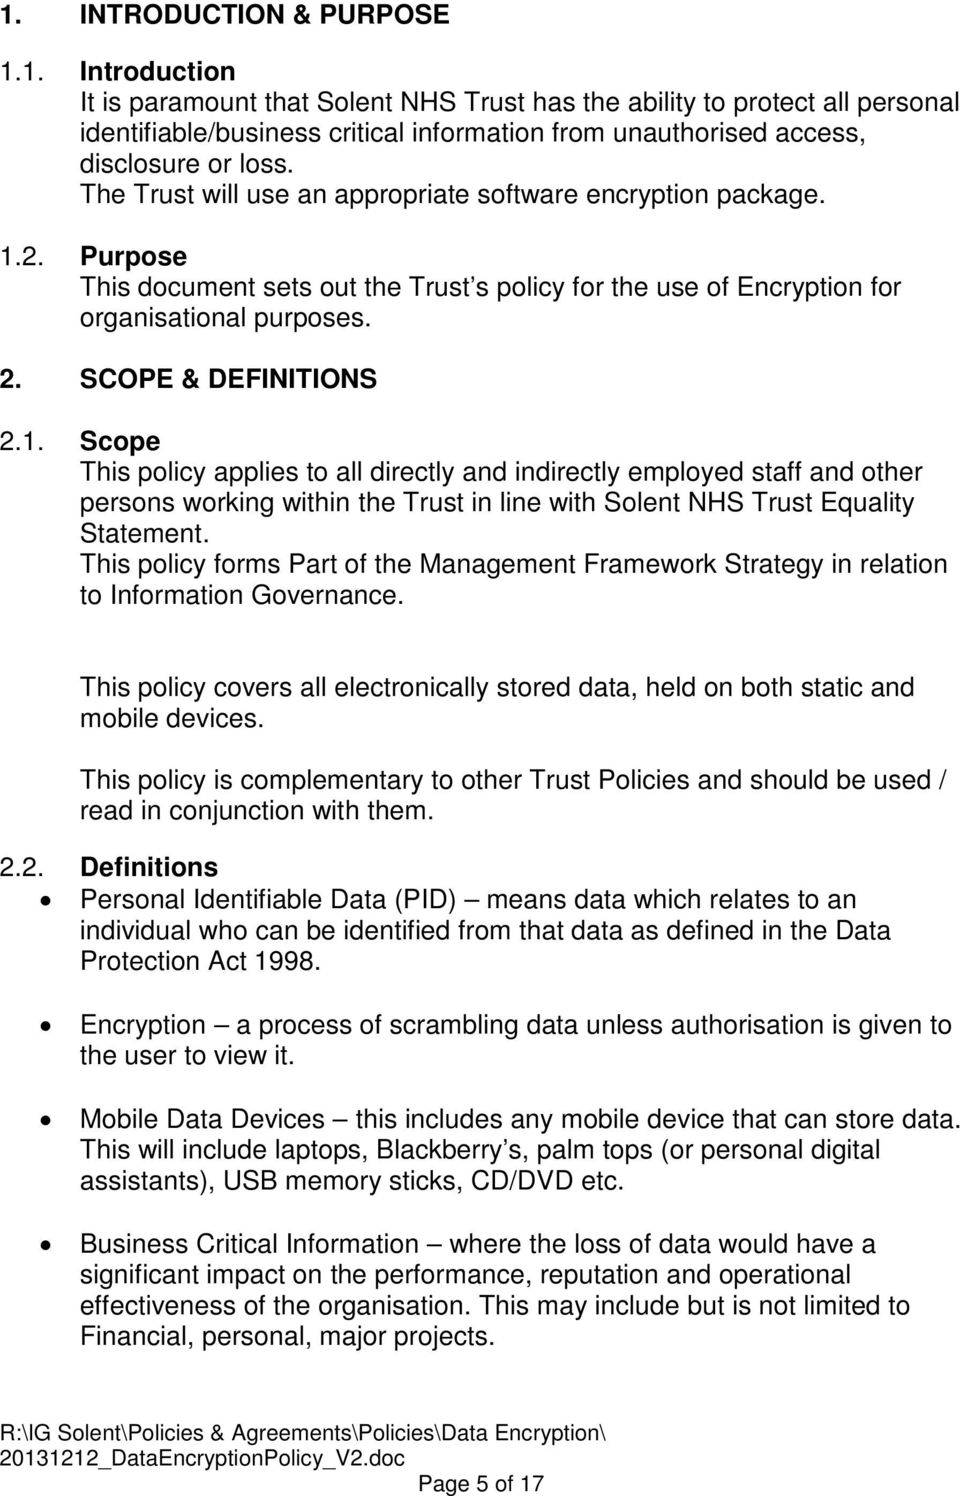 2. Purpose This document sets out the Trust s policy for the use of Encryption for organisational purposes. 2. SCOPE & DEFINITIONS 2.1.